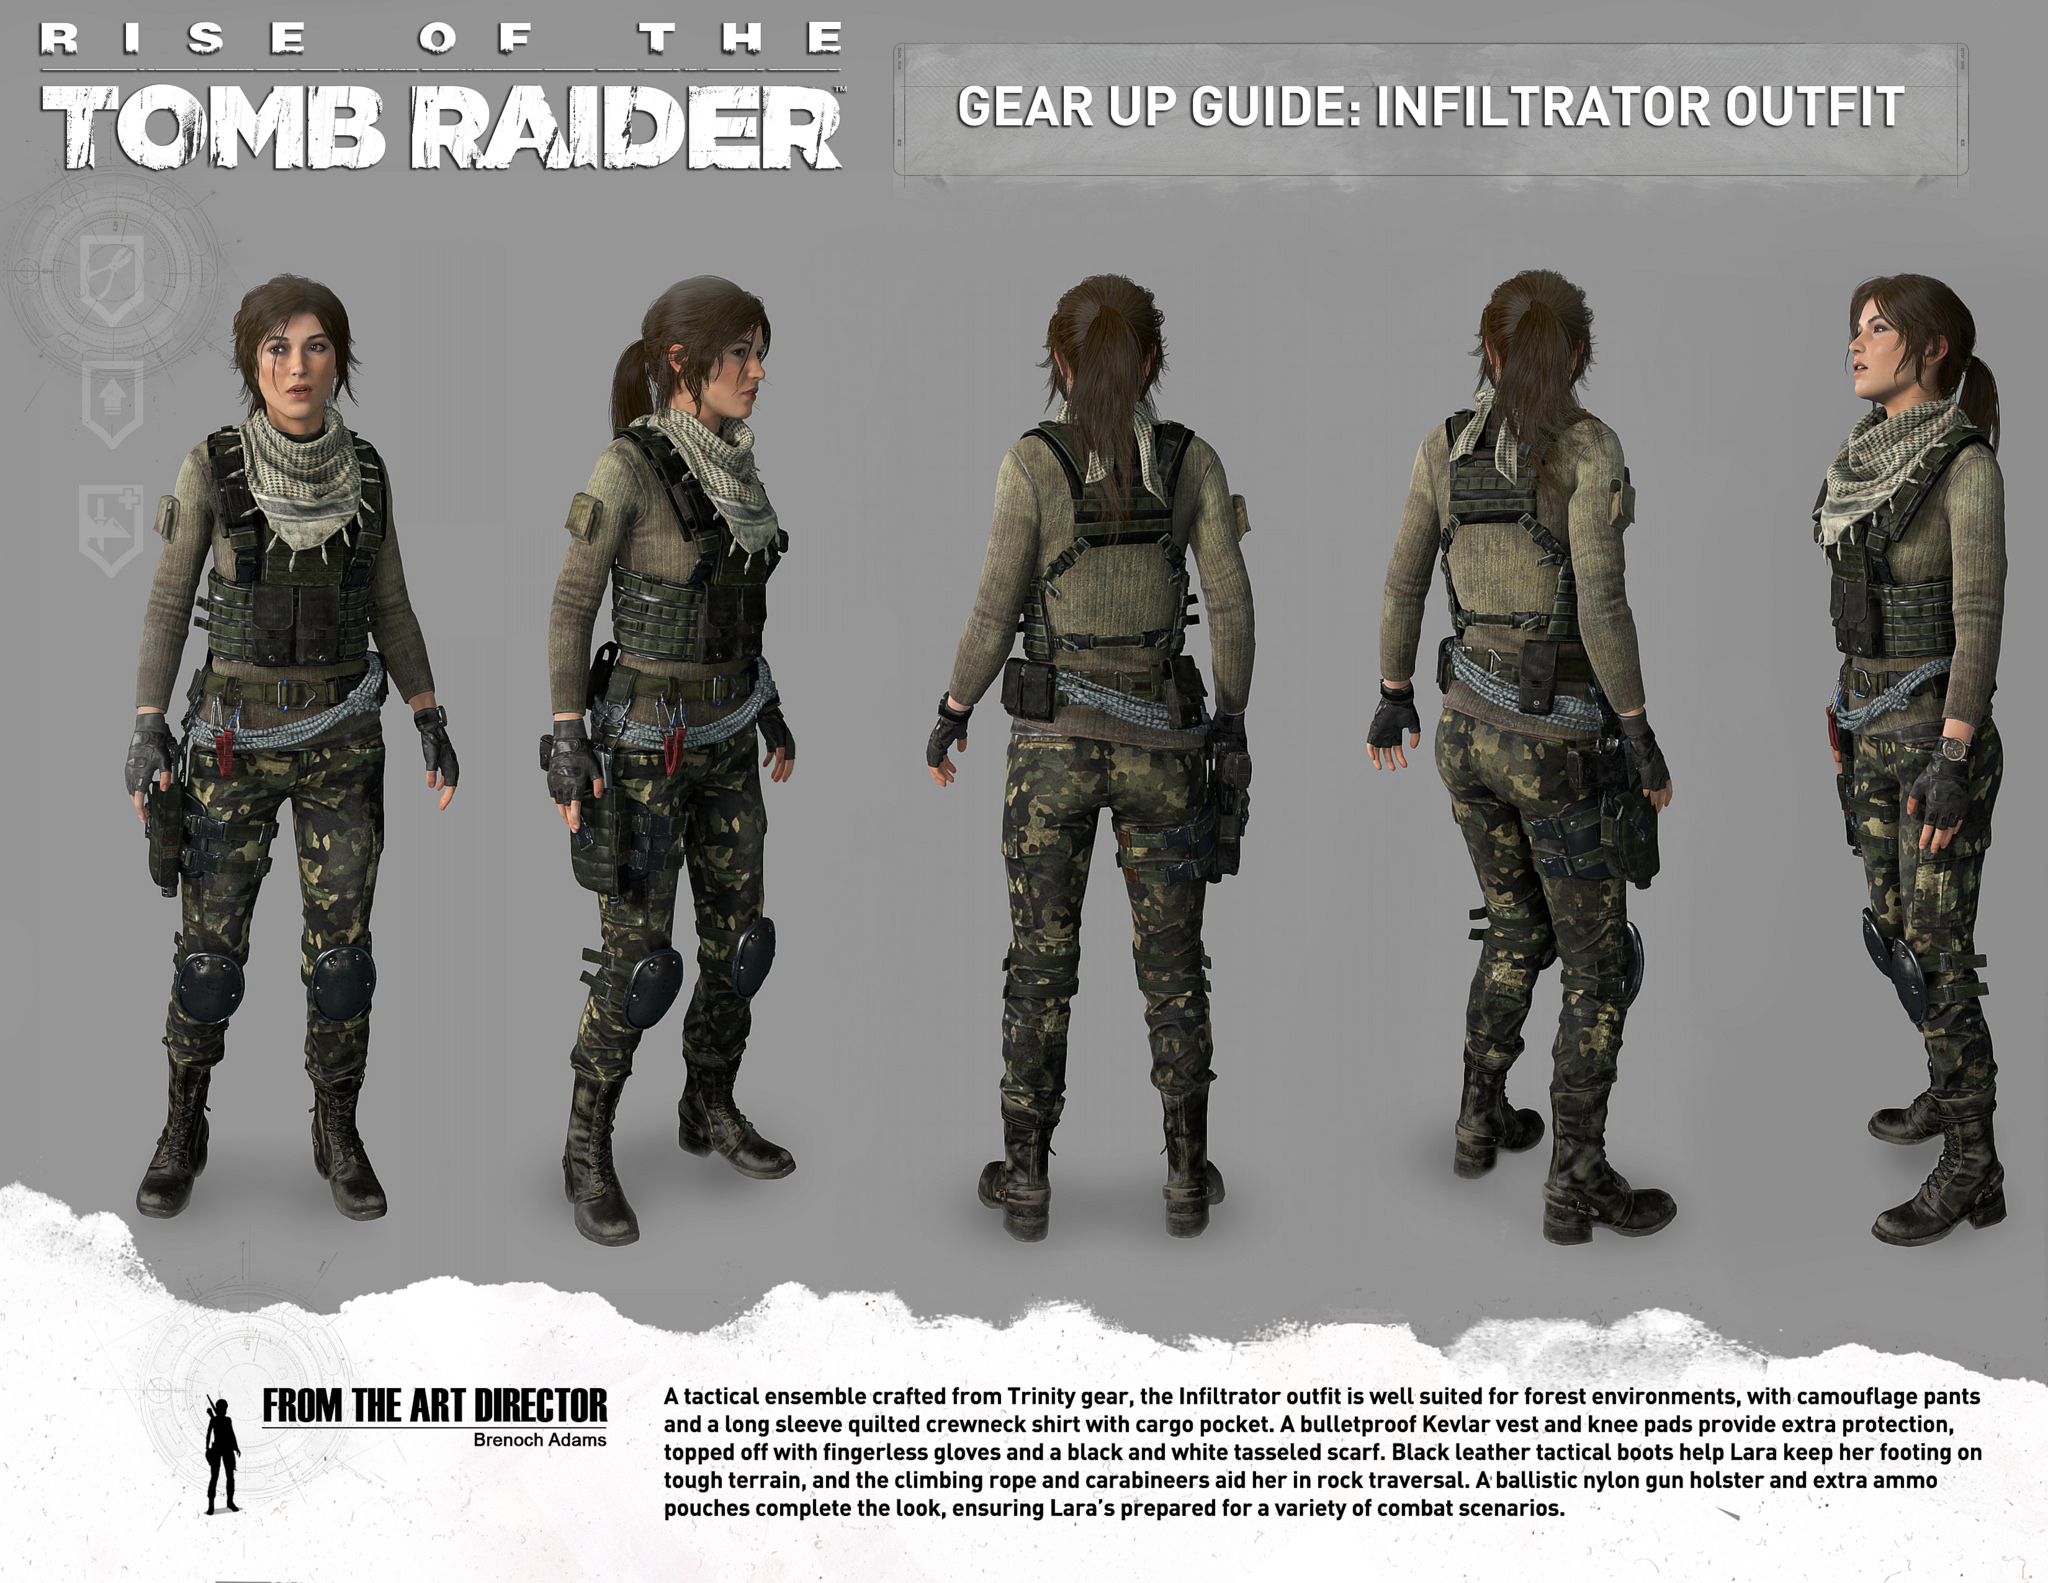 Infiltrator Outfit